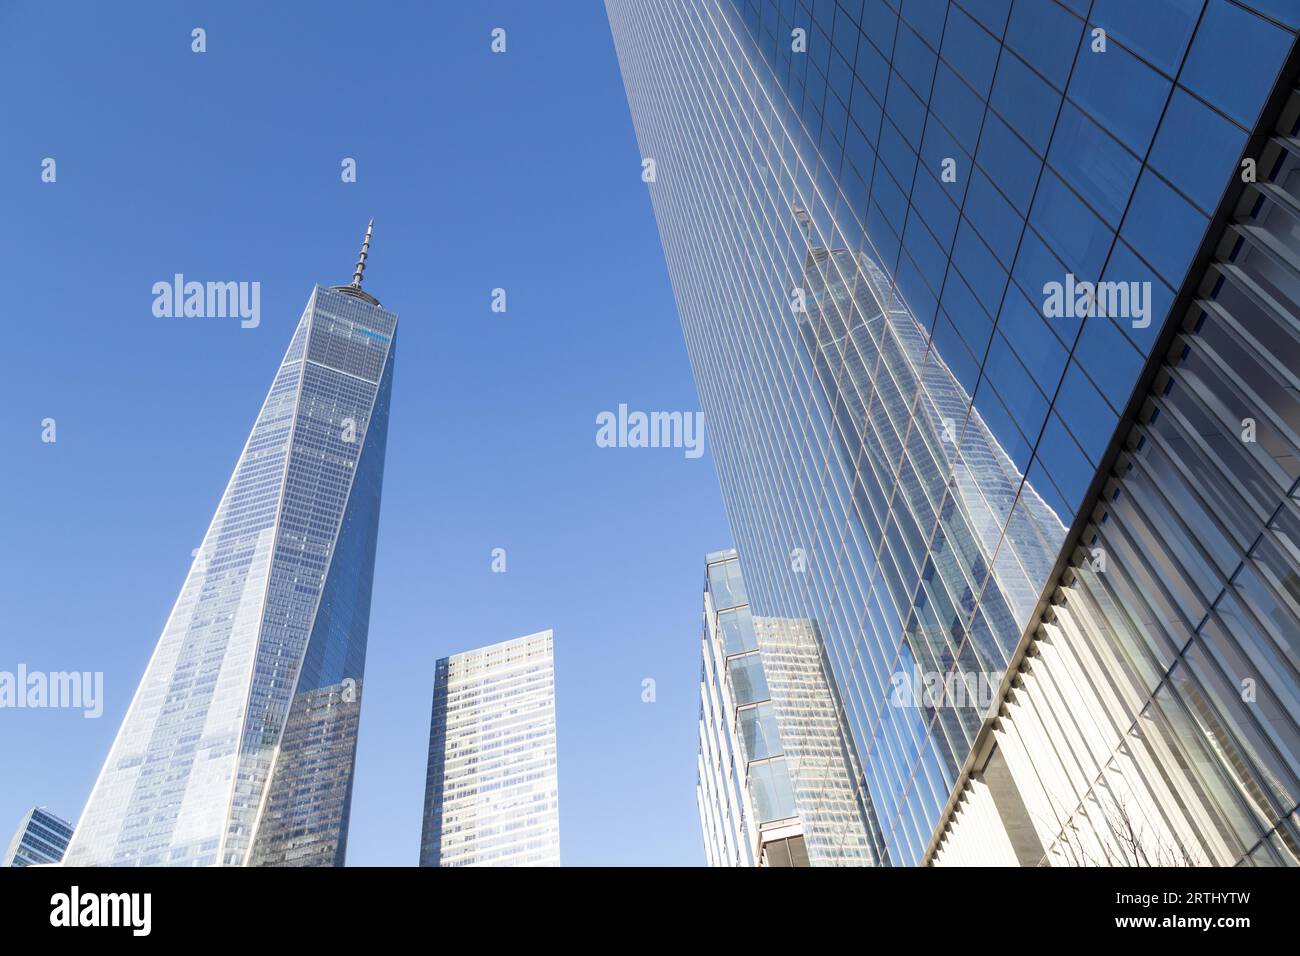 New York, United States of America, November 18, 2016: View of the One World Trade Center in Lower Manhattan Stock Photo